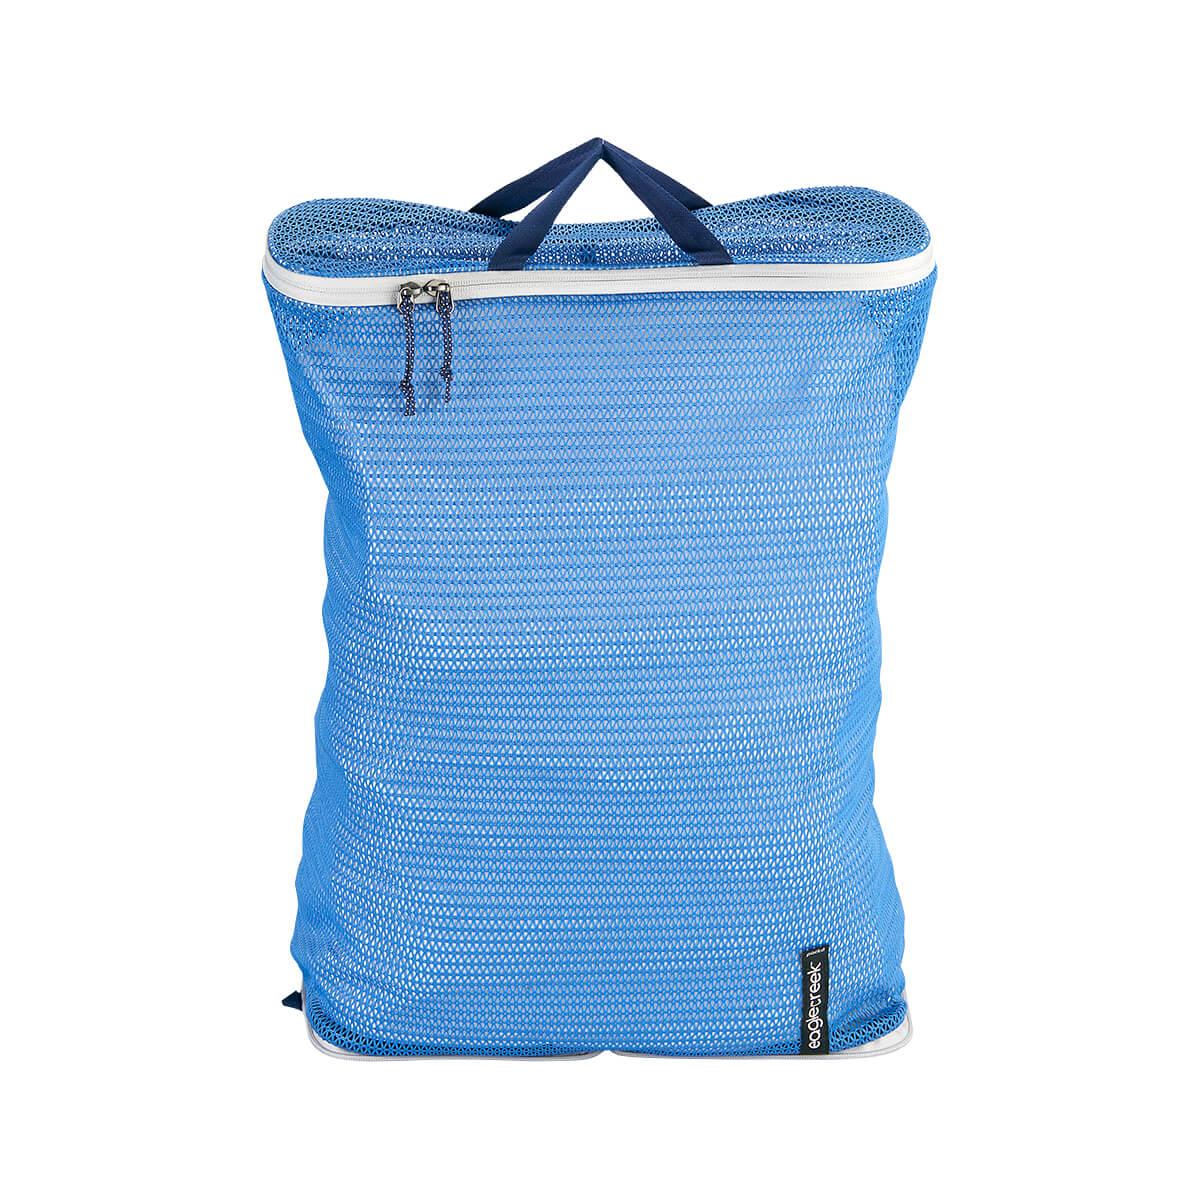  Pack- It Reveal Laundry Sac